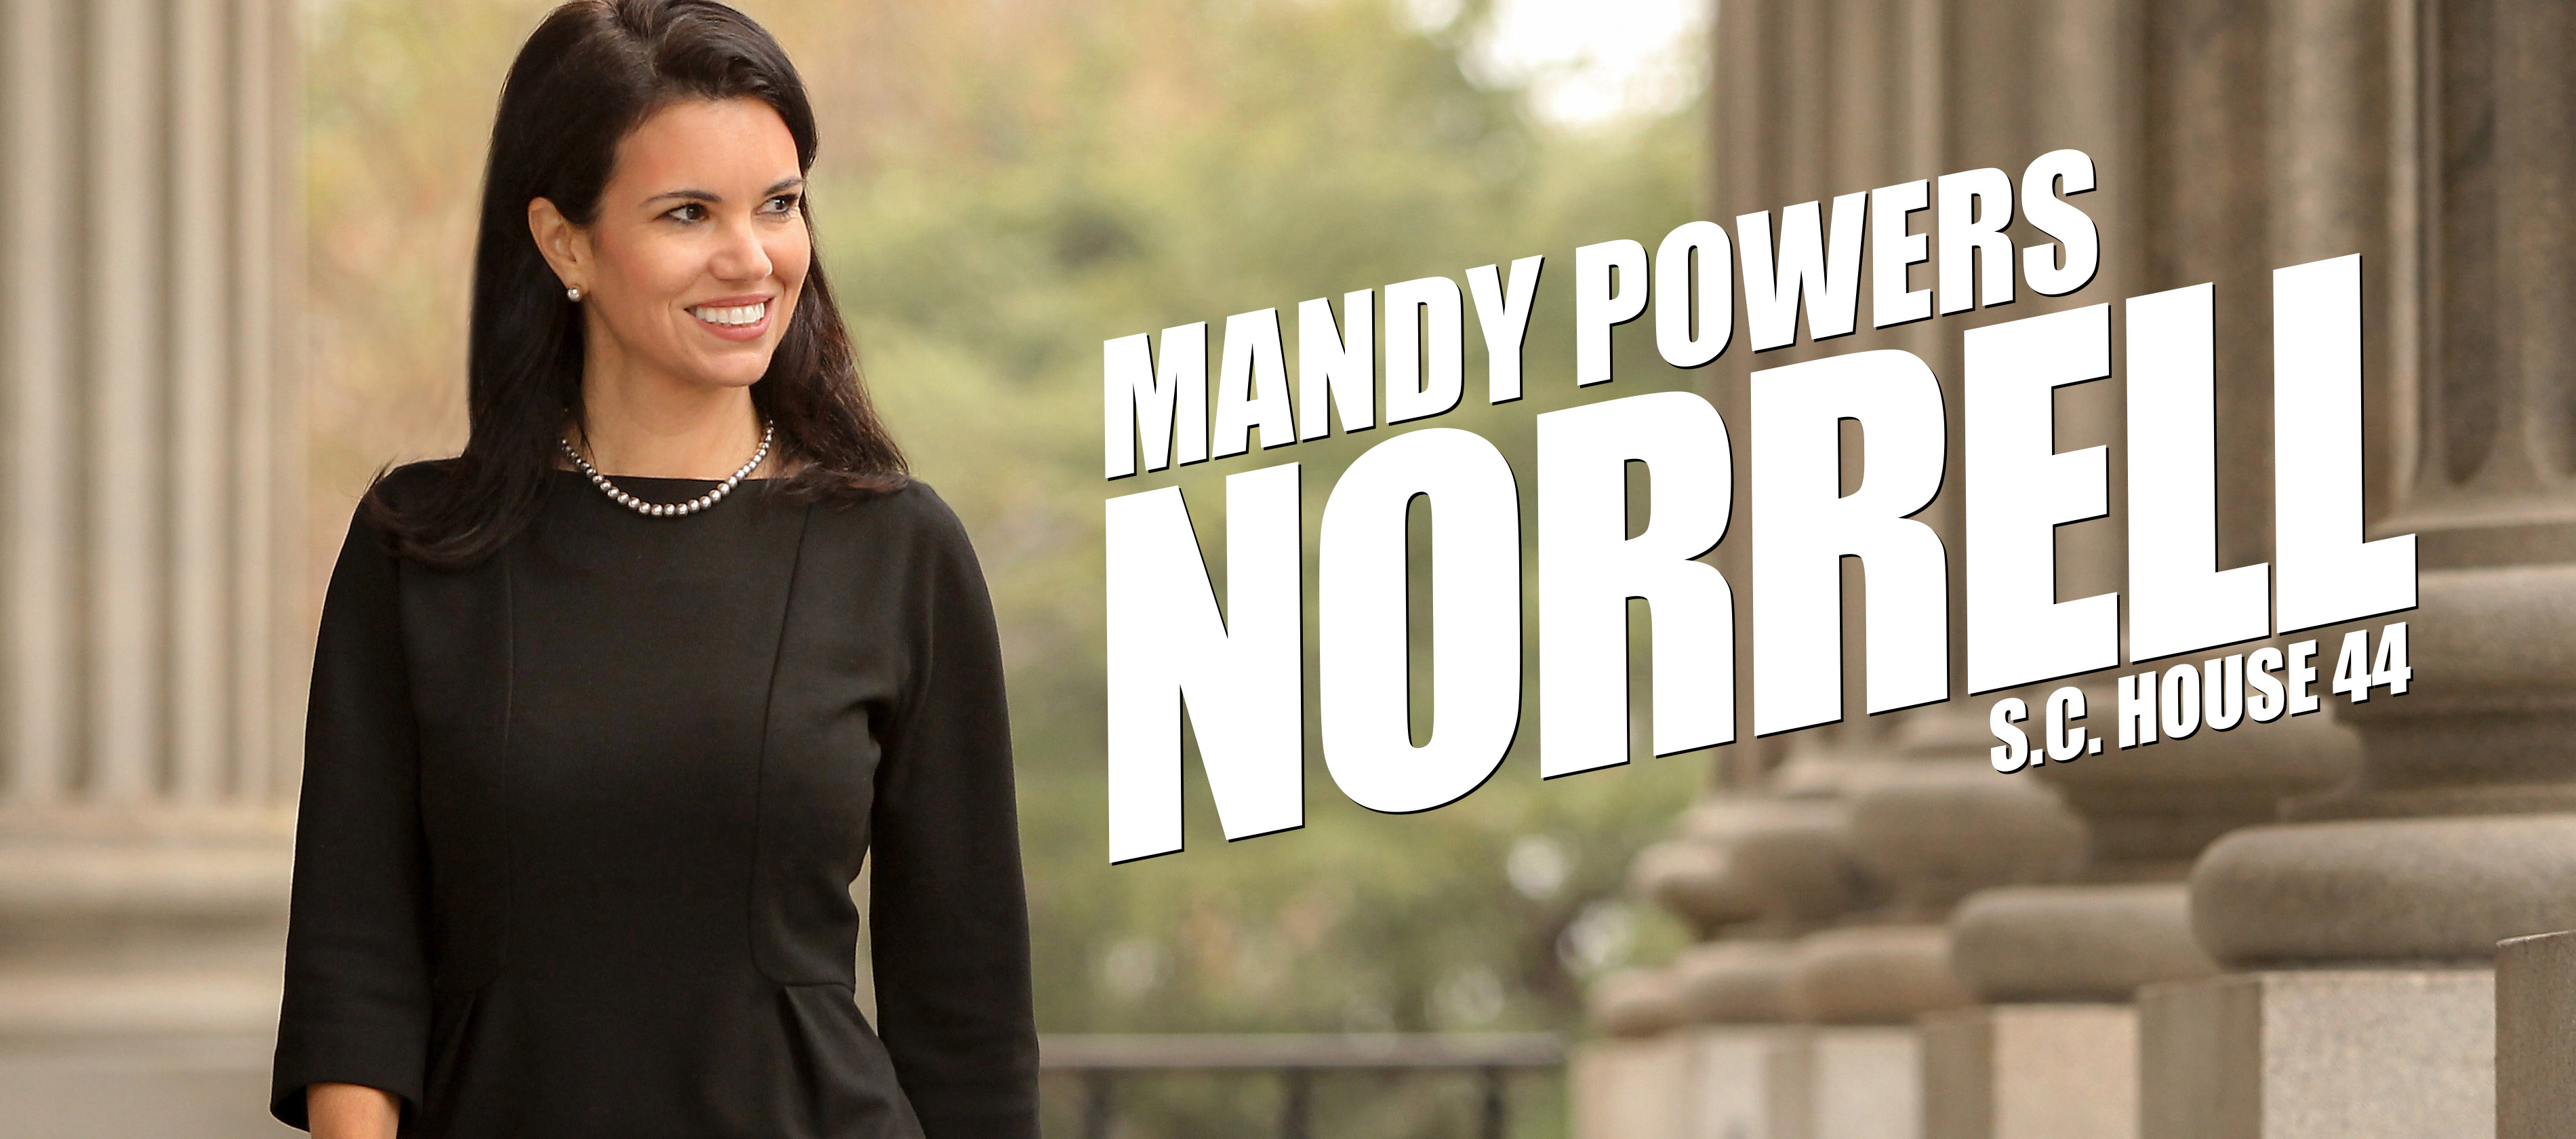 Mandy Norrell for S.C. House of Representatives